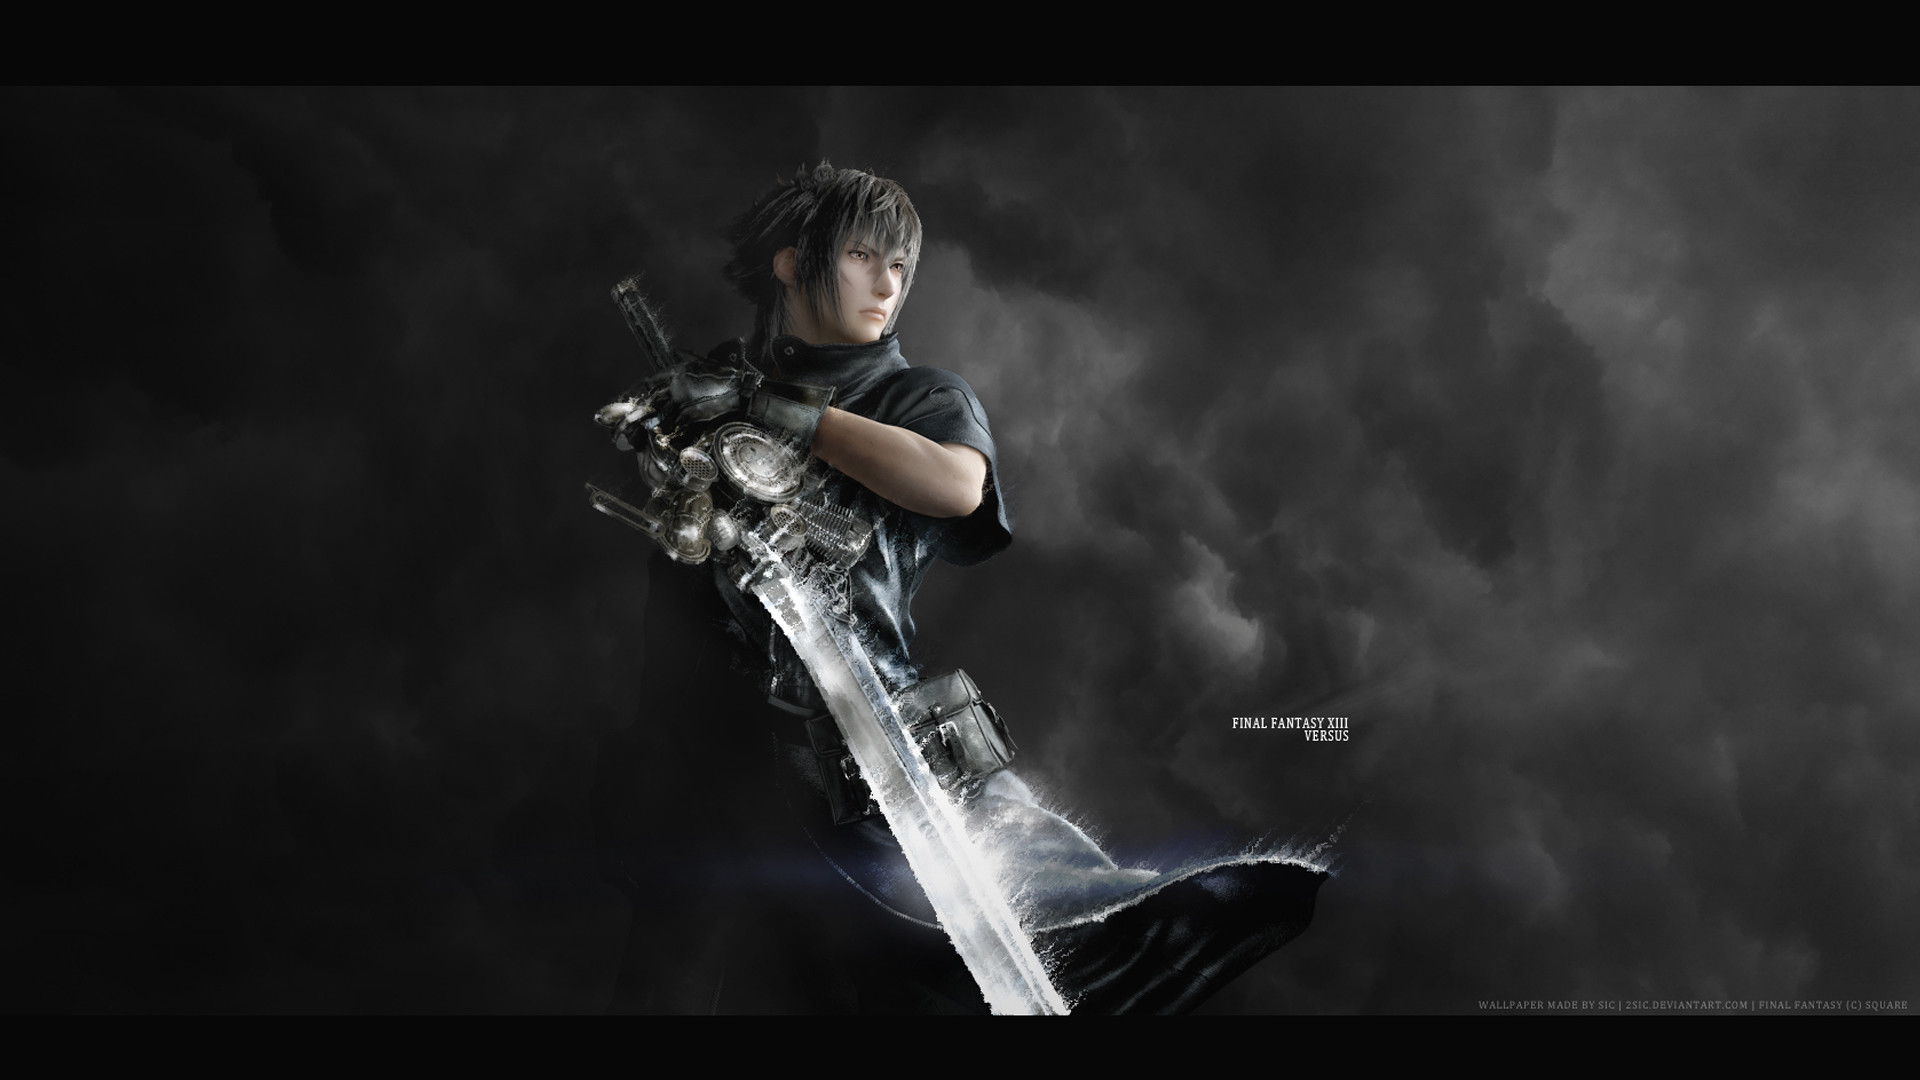 Final Fantasy xv wallpapers and images – wallpapers, pictures, photos .